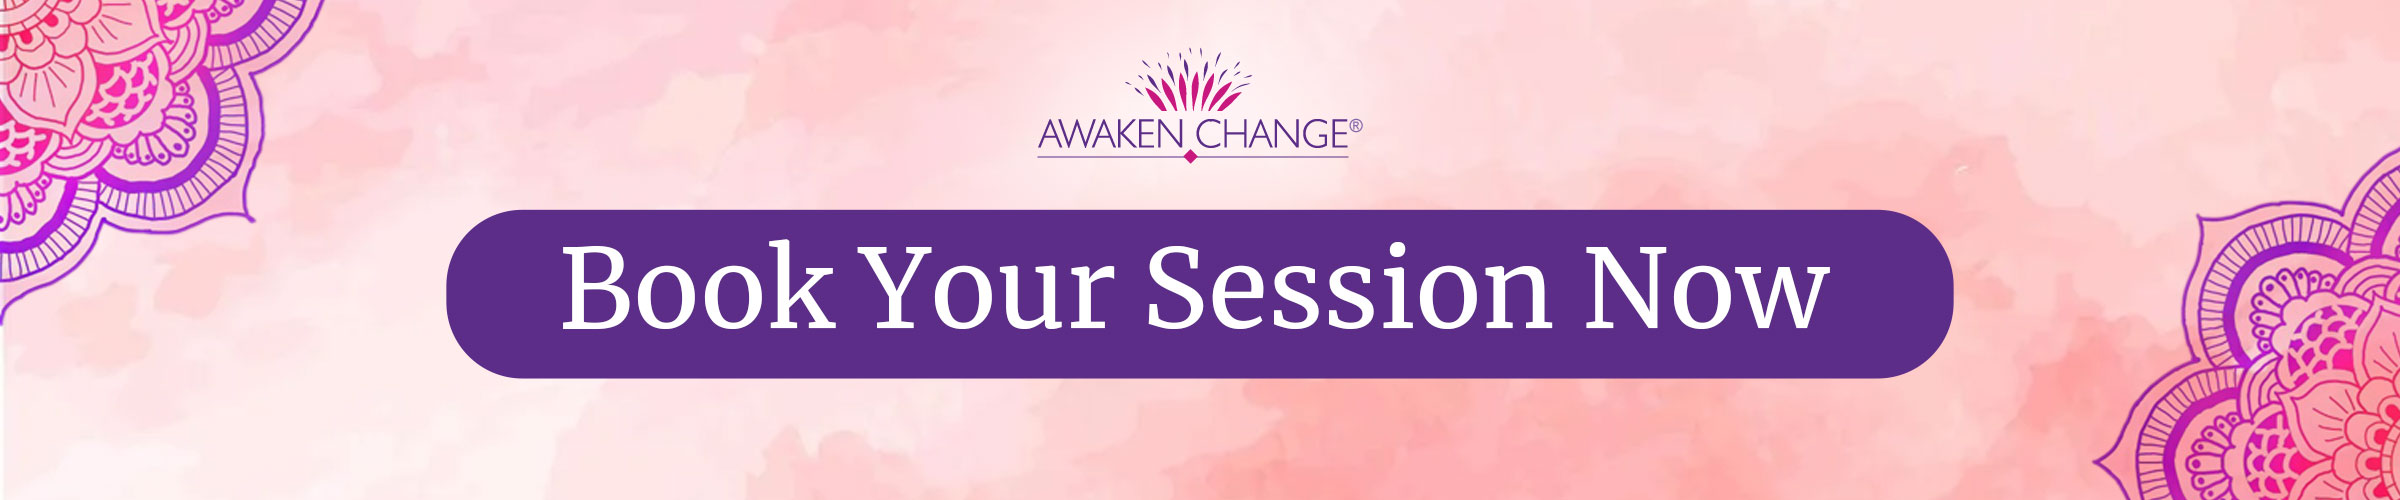 Awaken Change Book Your session Now